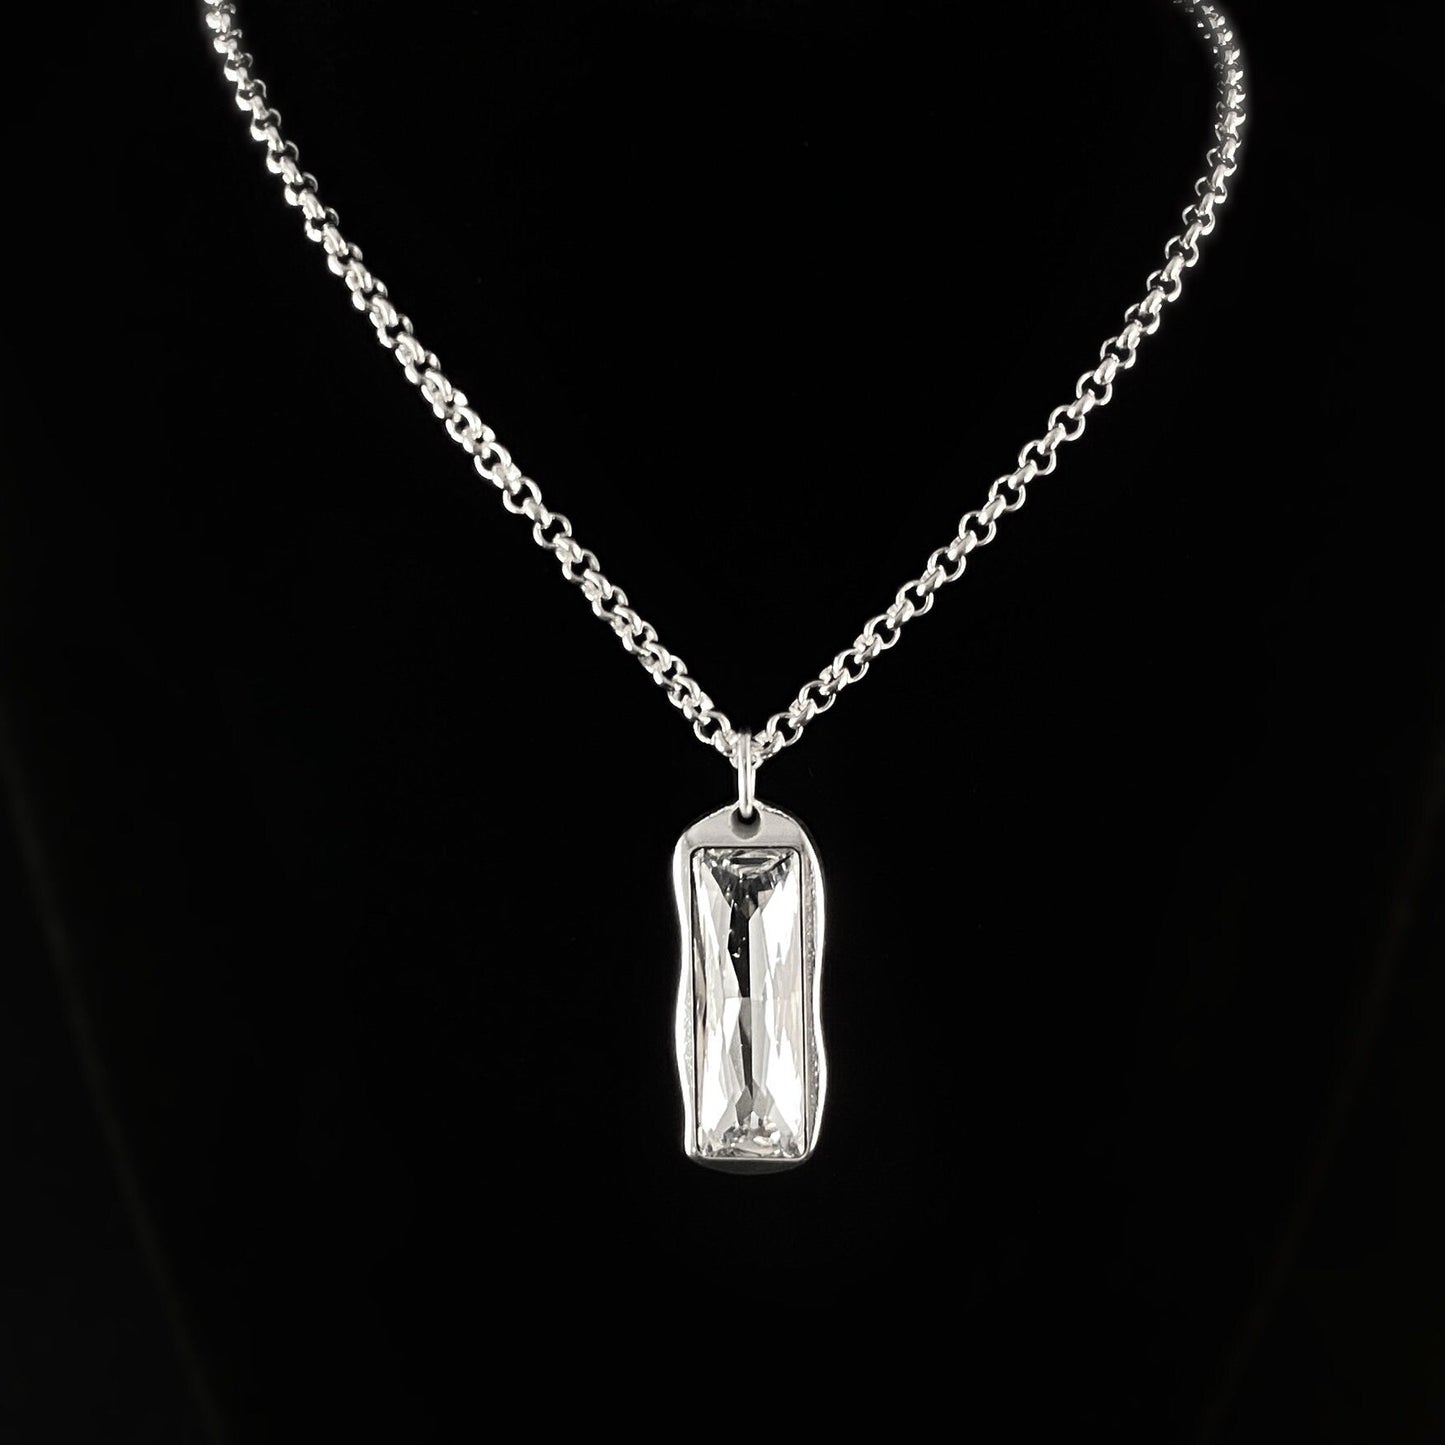 Abstract Rectangular Crystal Statement Pendant on Silver Chain Necklace - Handmade, Nickel Free - Ulla